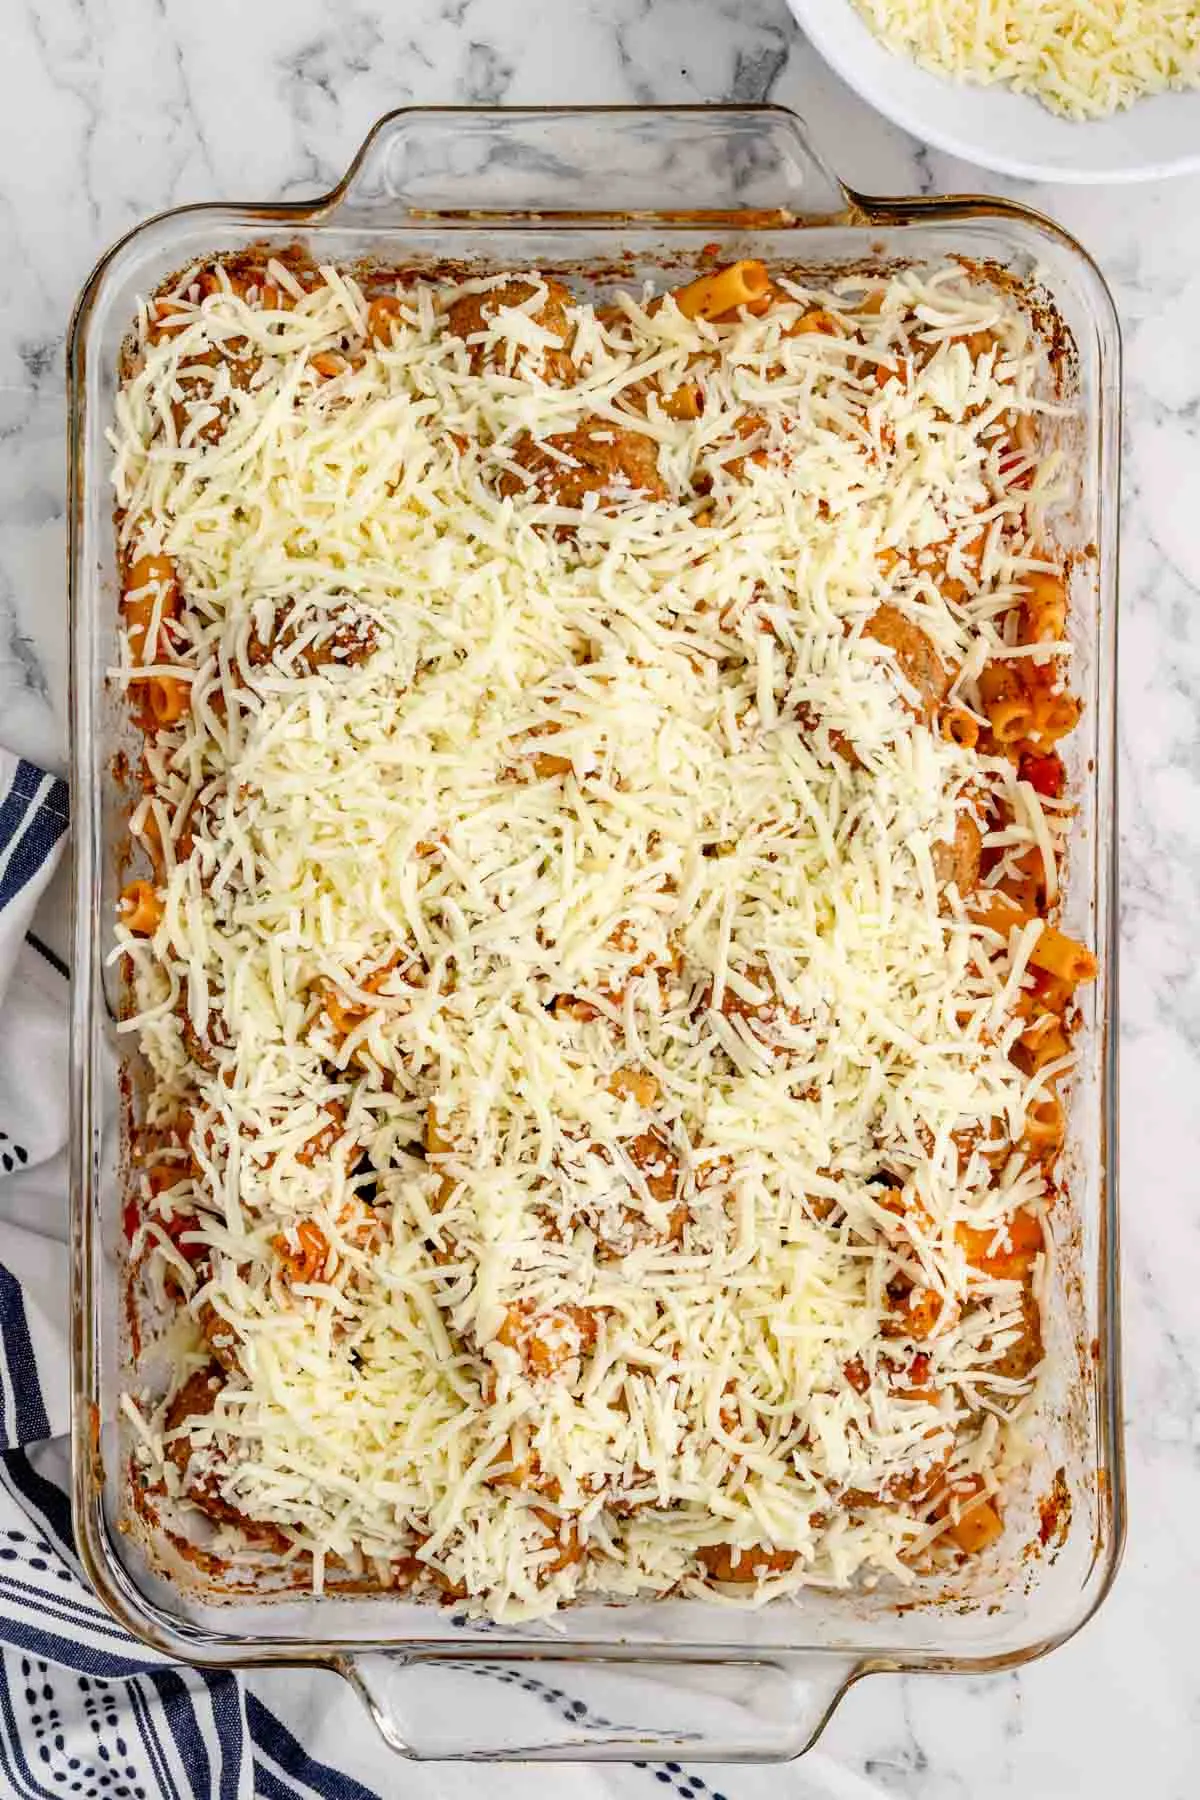 shredded mozzarella on top of meatballs and ziti in a baking dish